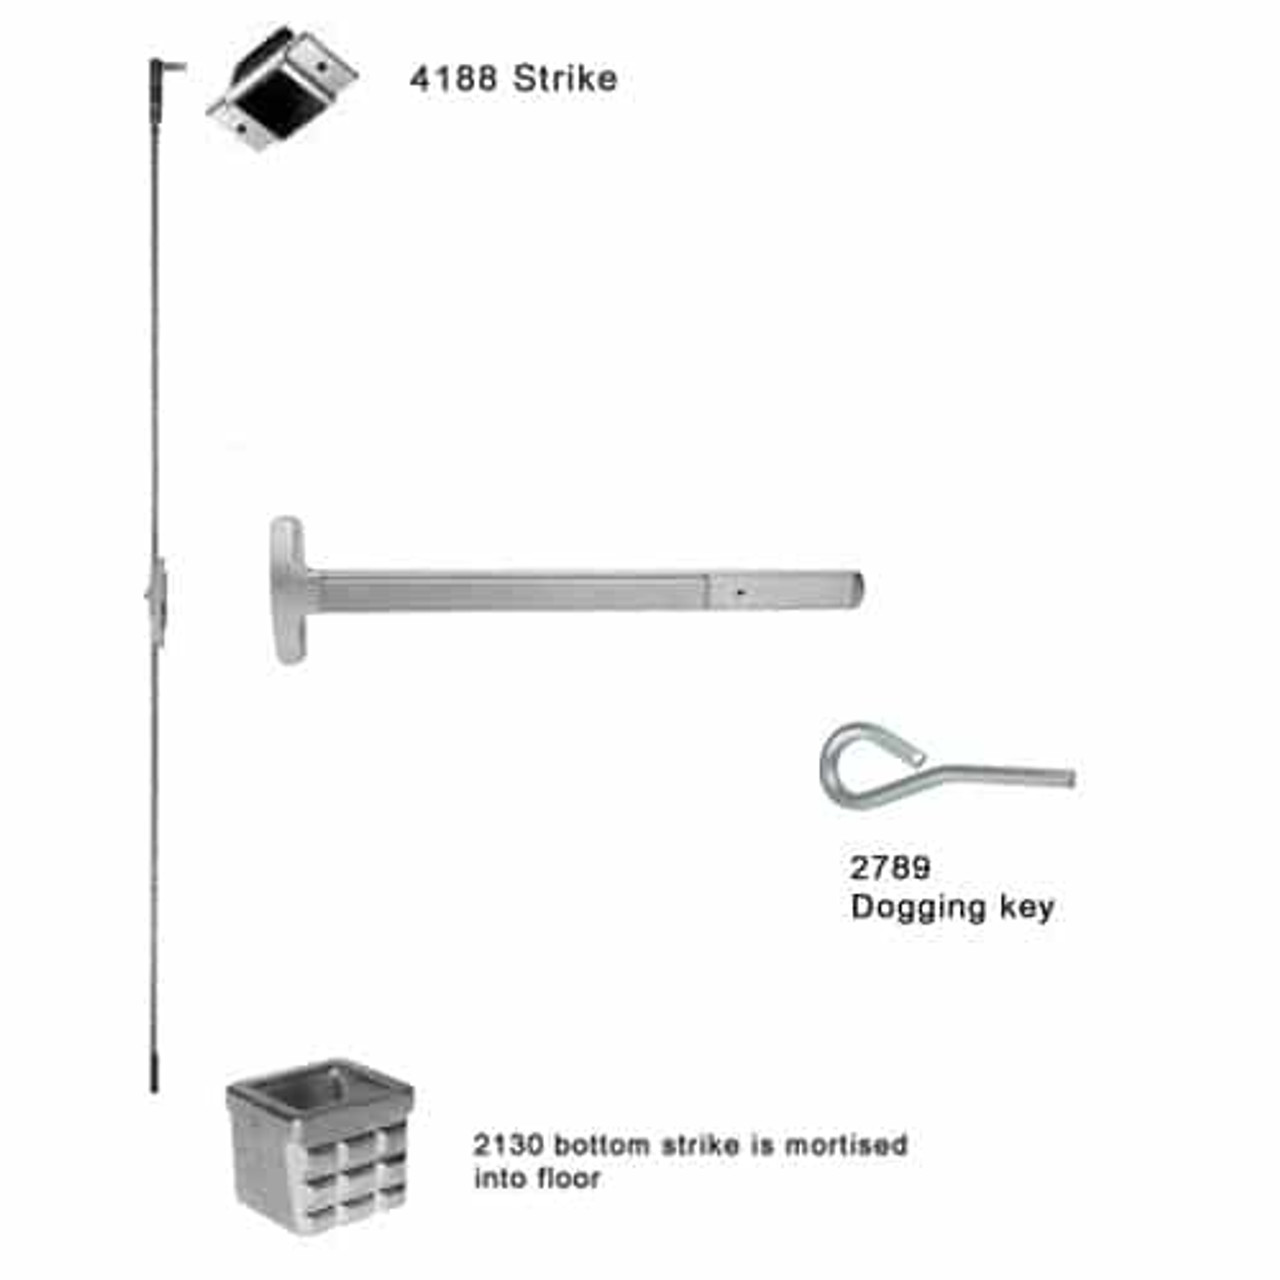 24-C-NL-US28-2-RHR Falcon 24 Series Concealed Vertical Rod Device with 718NL Delta Night Latch Trim in Anodized Aluminum